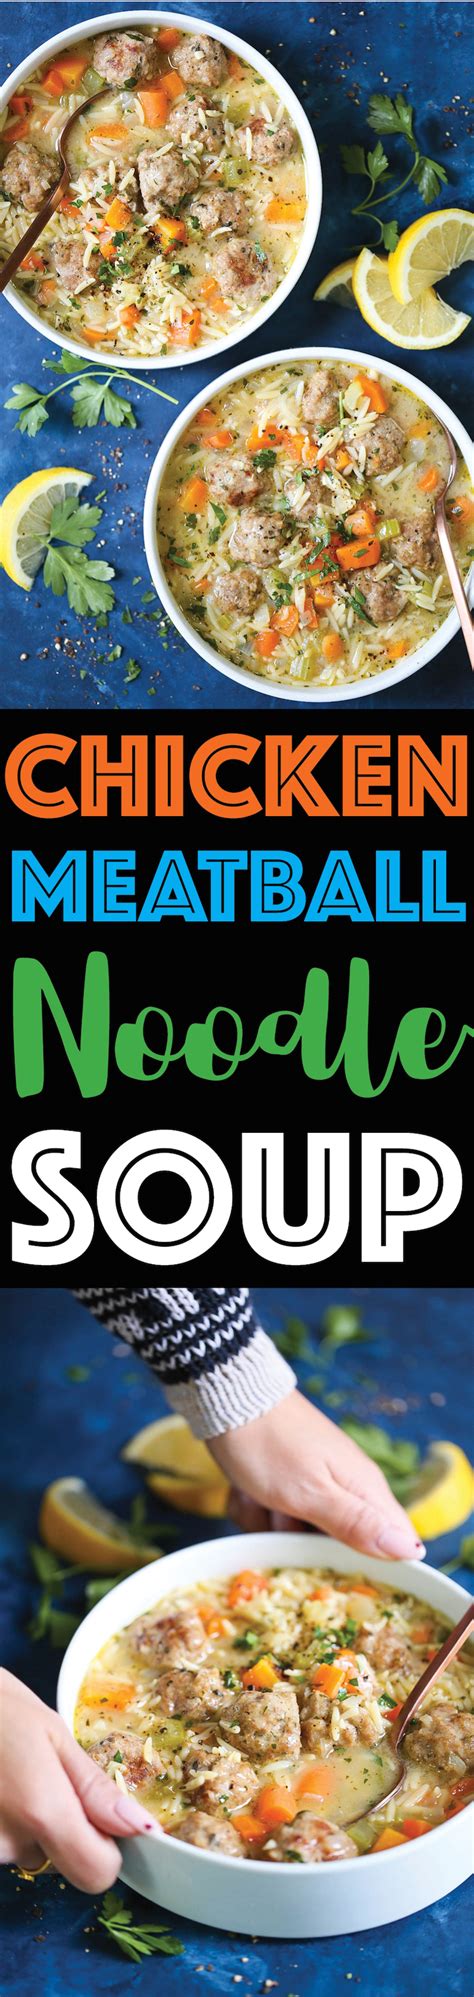 Great on it's own for lunch or spooned over rice or noodles. Chicken Meatball Noodle Soup | Recipe in 2020 | Soup ...